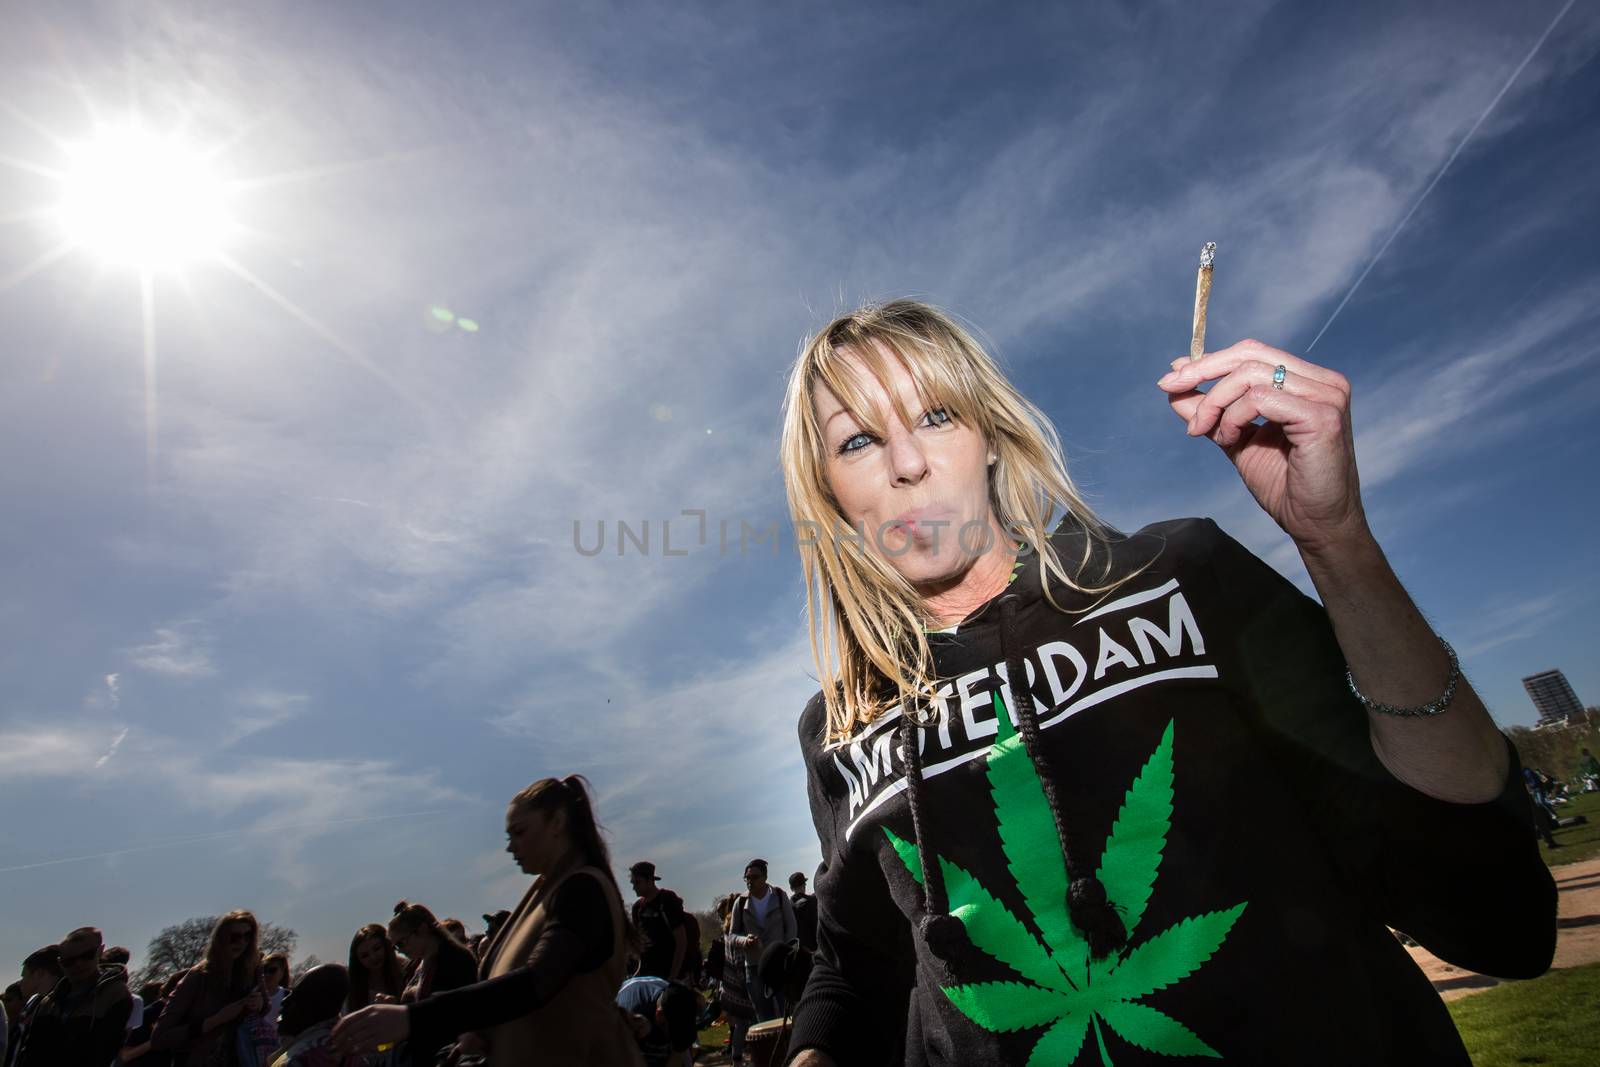 UNITED-KINGDOM, London: A woman smokes a reefer as hundreds of pro-cannabis supporters gather in Hyde Park, in London for 4/20 day, a giant annual smoke-in  on April 20, 2016. 